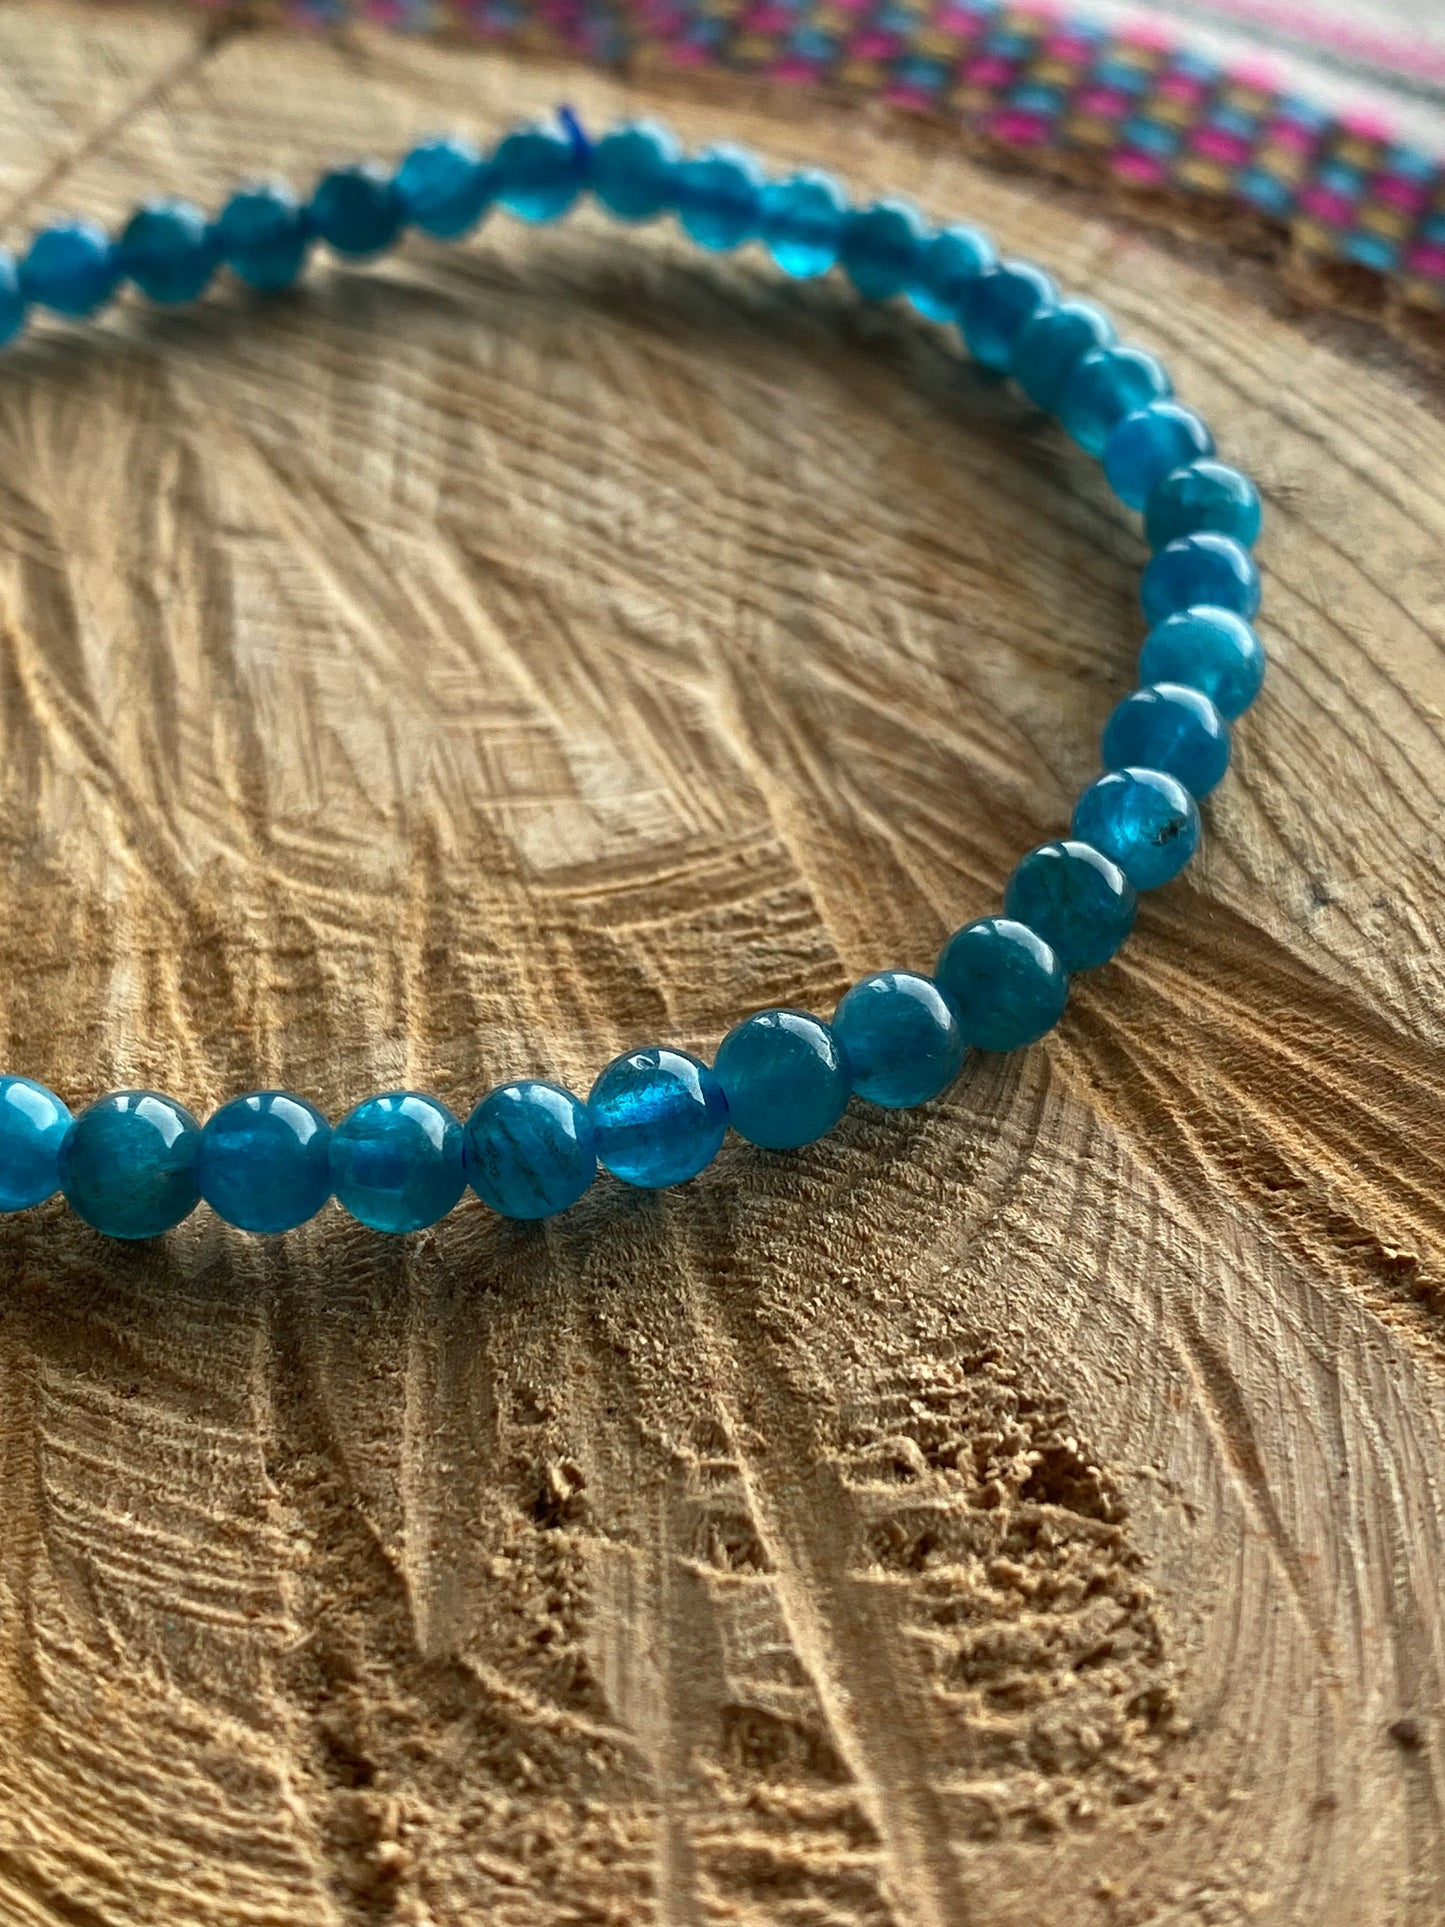 Apatite crystal bracelet, crystal to clear confusion, achieve goals, cleanse aura, promotes harmony